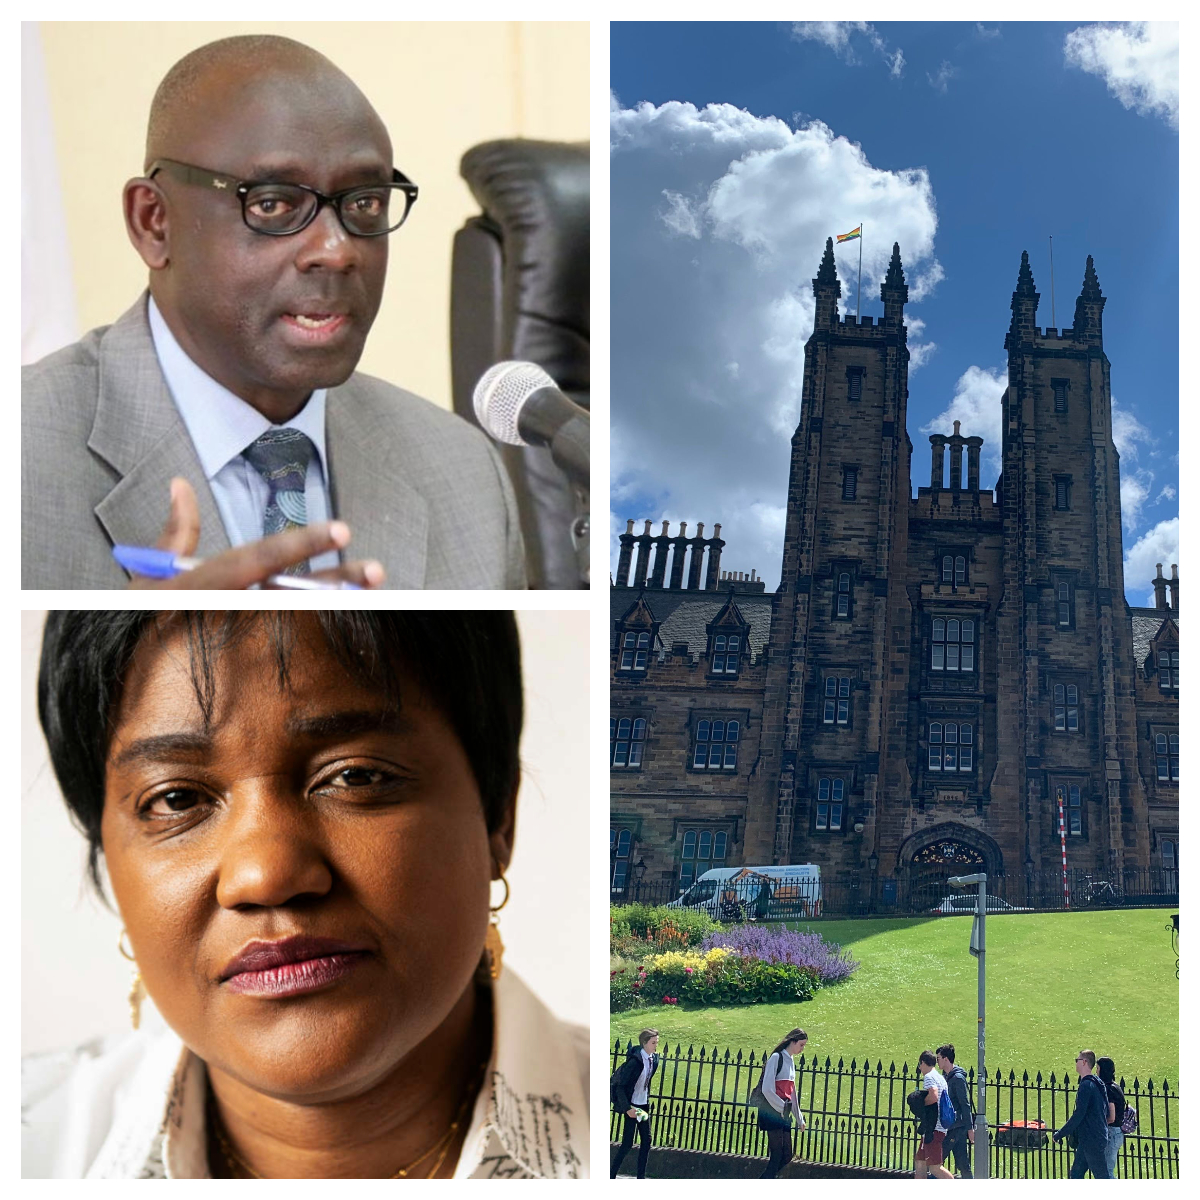 Pressure Mounts on University of Edinburgh to Part Ways With Rector Involved in Genocide Denial